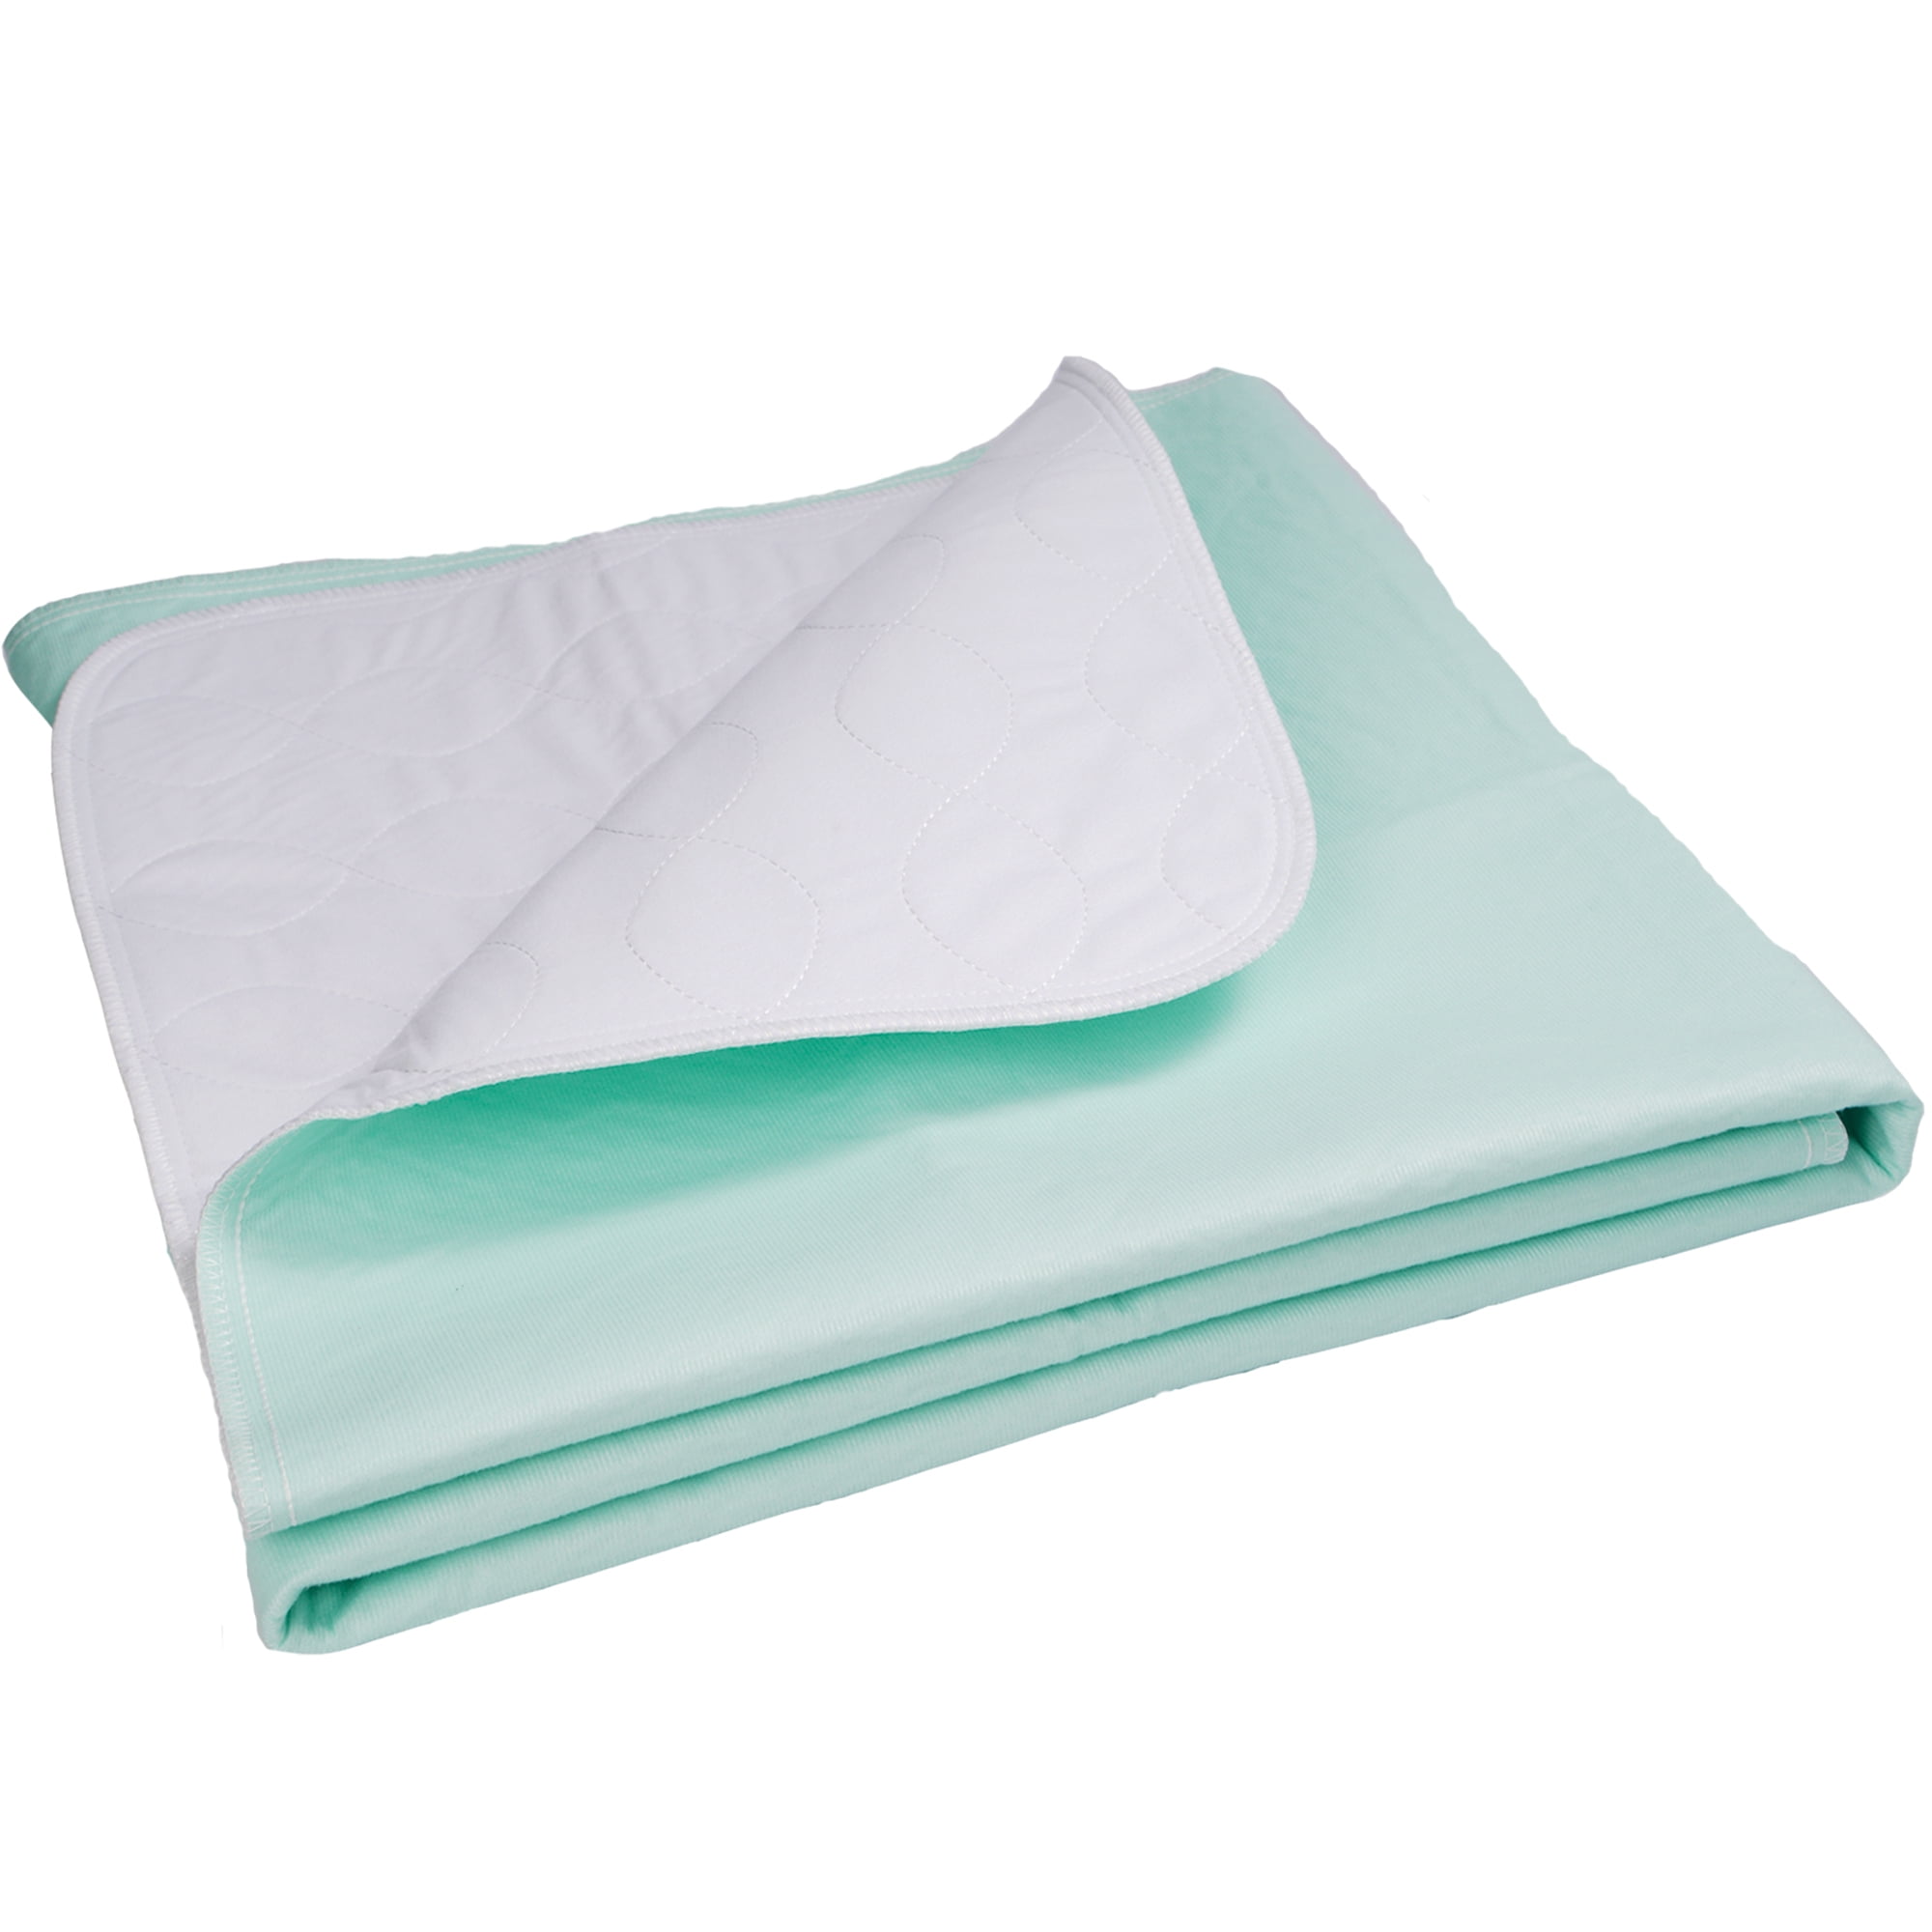 Unifree Premium Absorbent Bed Pads for Incontinence Underpads, Soft Thick,  Washable, Non-Slip, Reusable Pee Pad for Adults or Children 34x52 (2